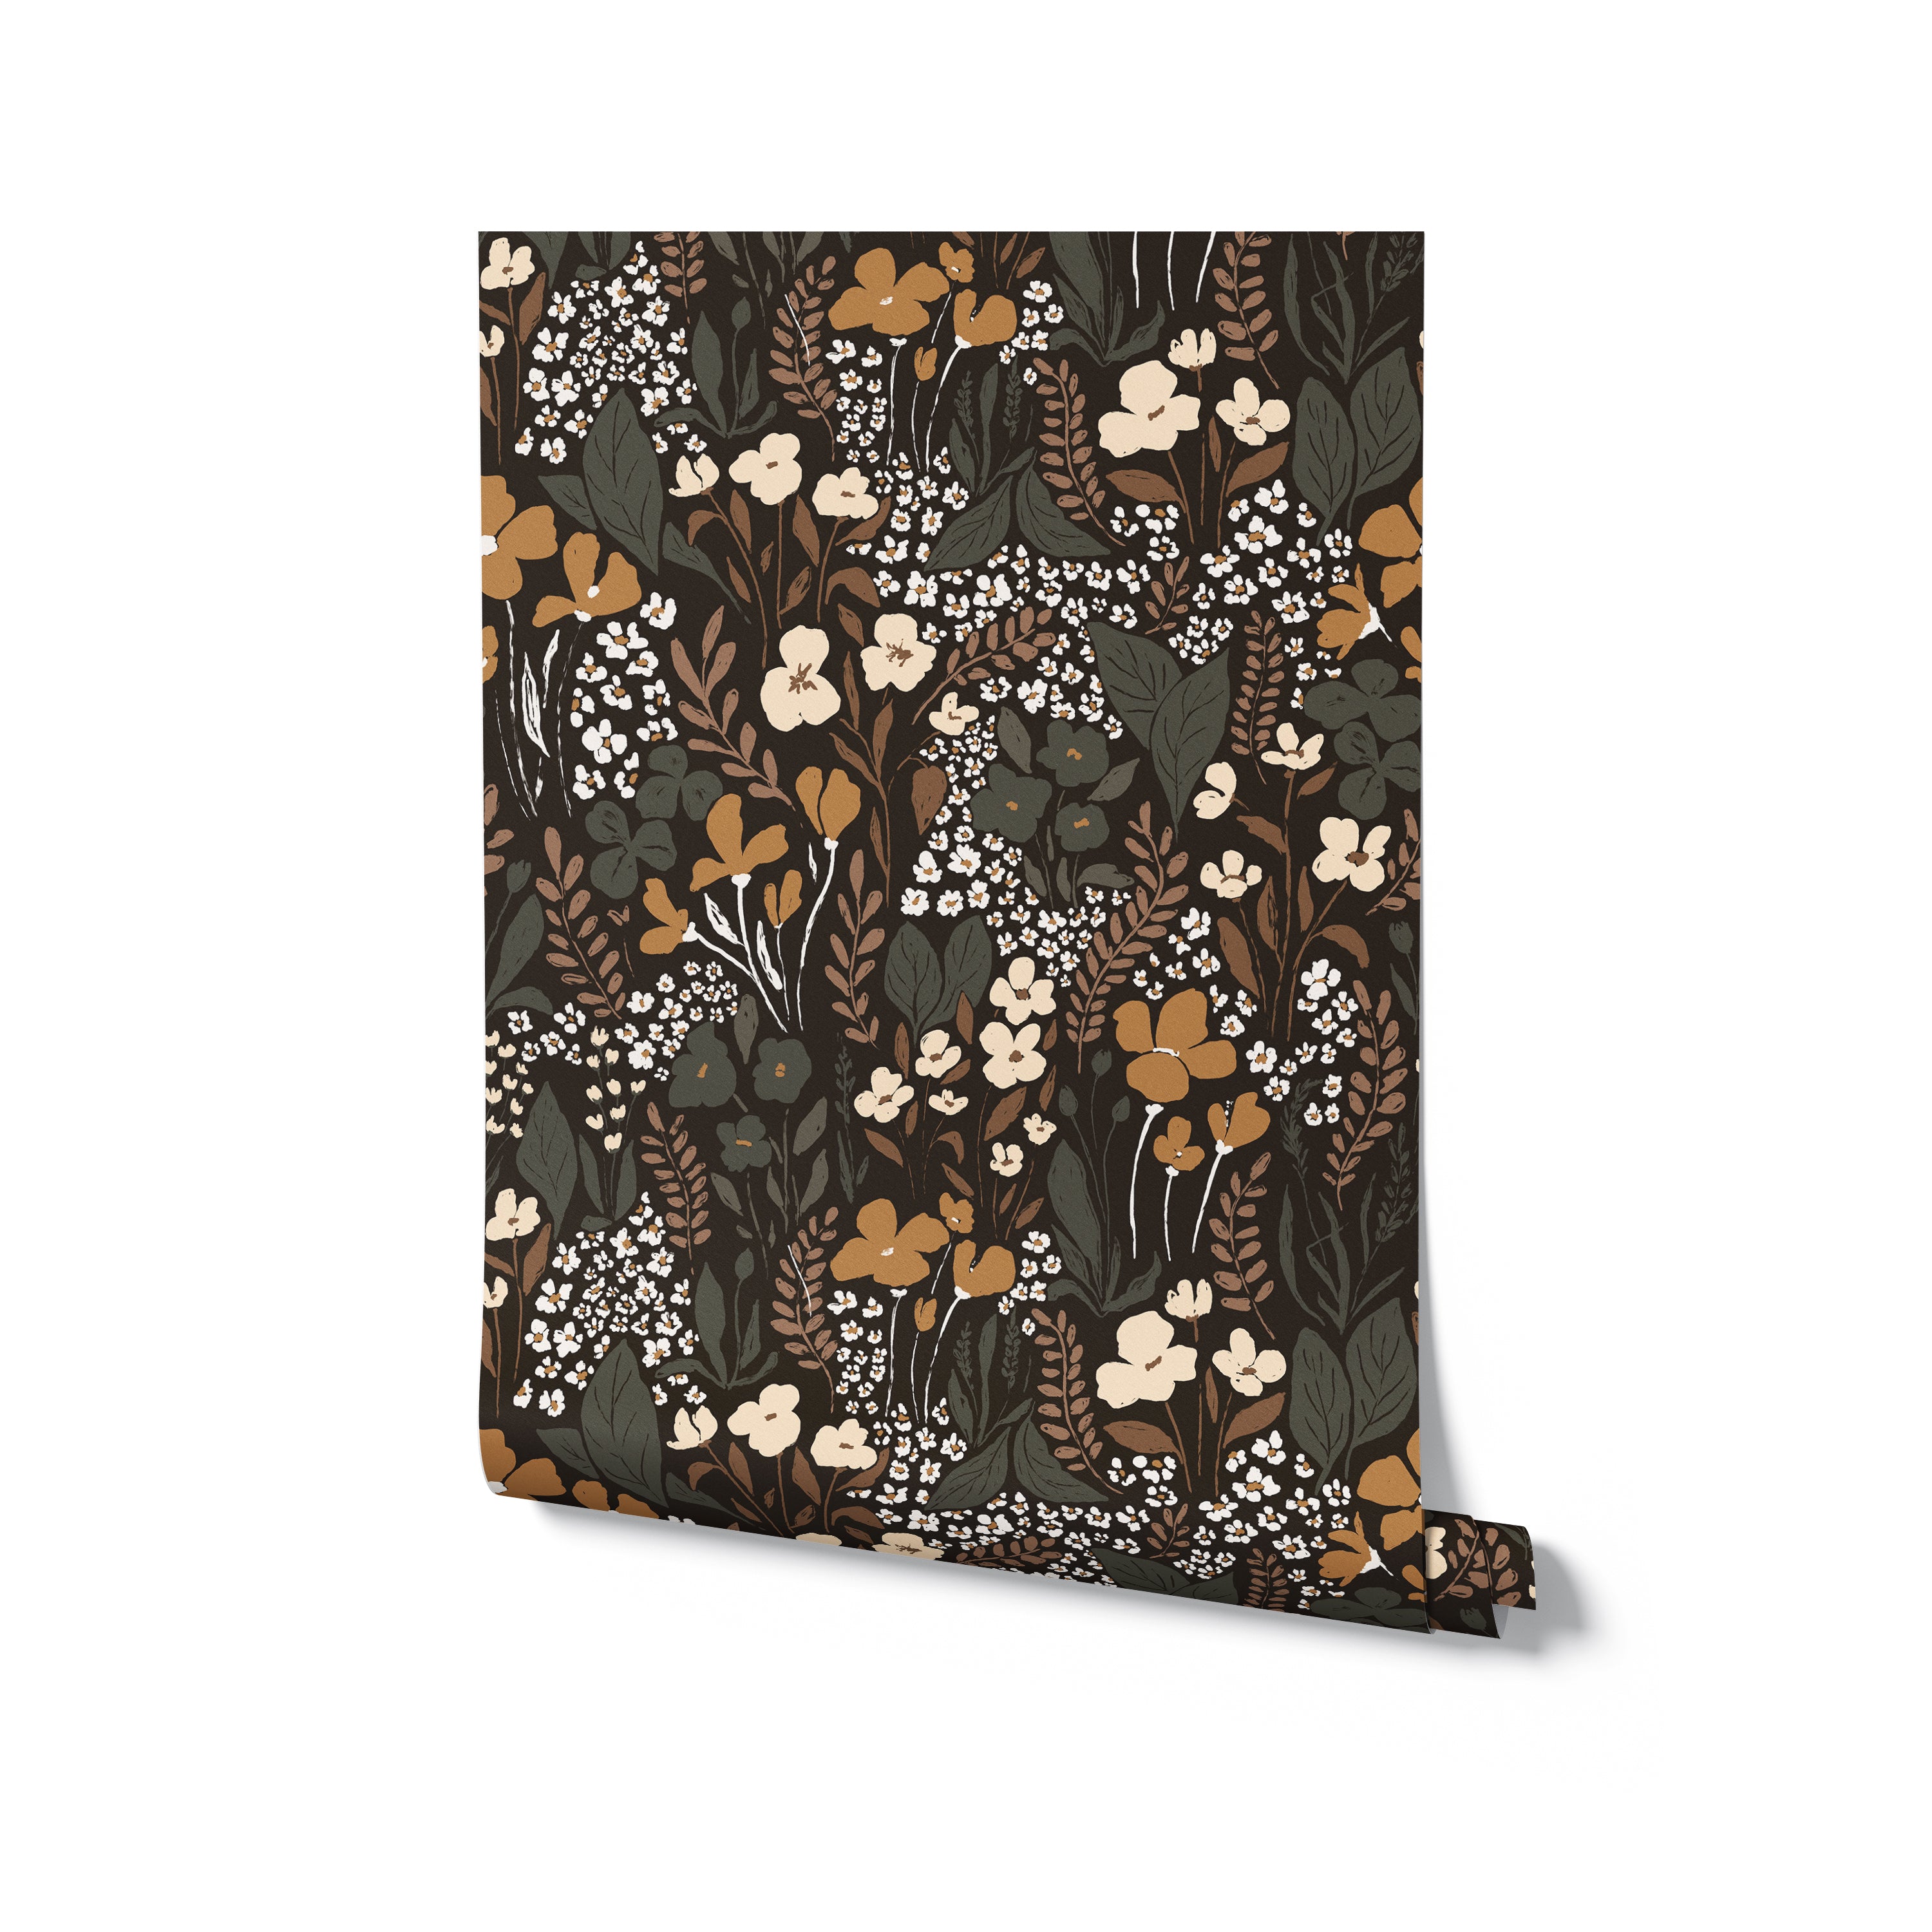 Roll of botanical wallpaper with a dark background showcasing a vibrant floral pattern with white, mustard, and green details, slightly unfurled at the corner to reveal its intricate design.